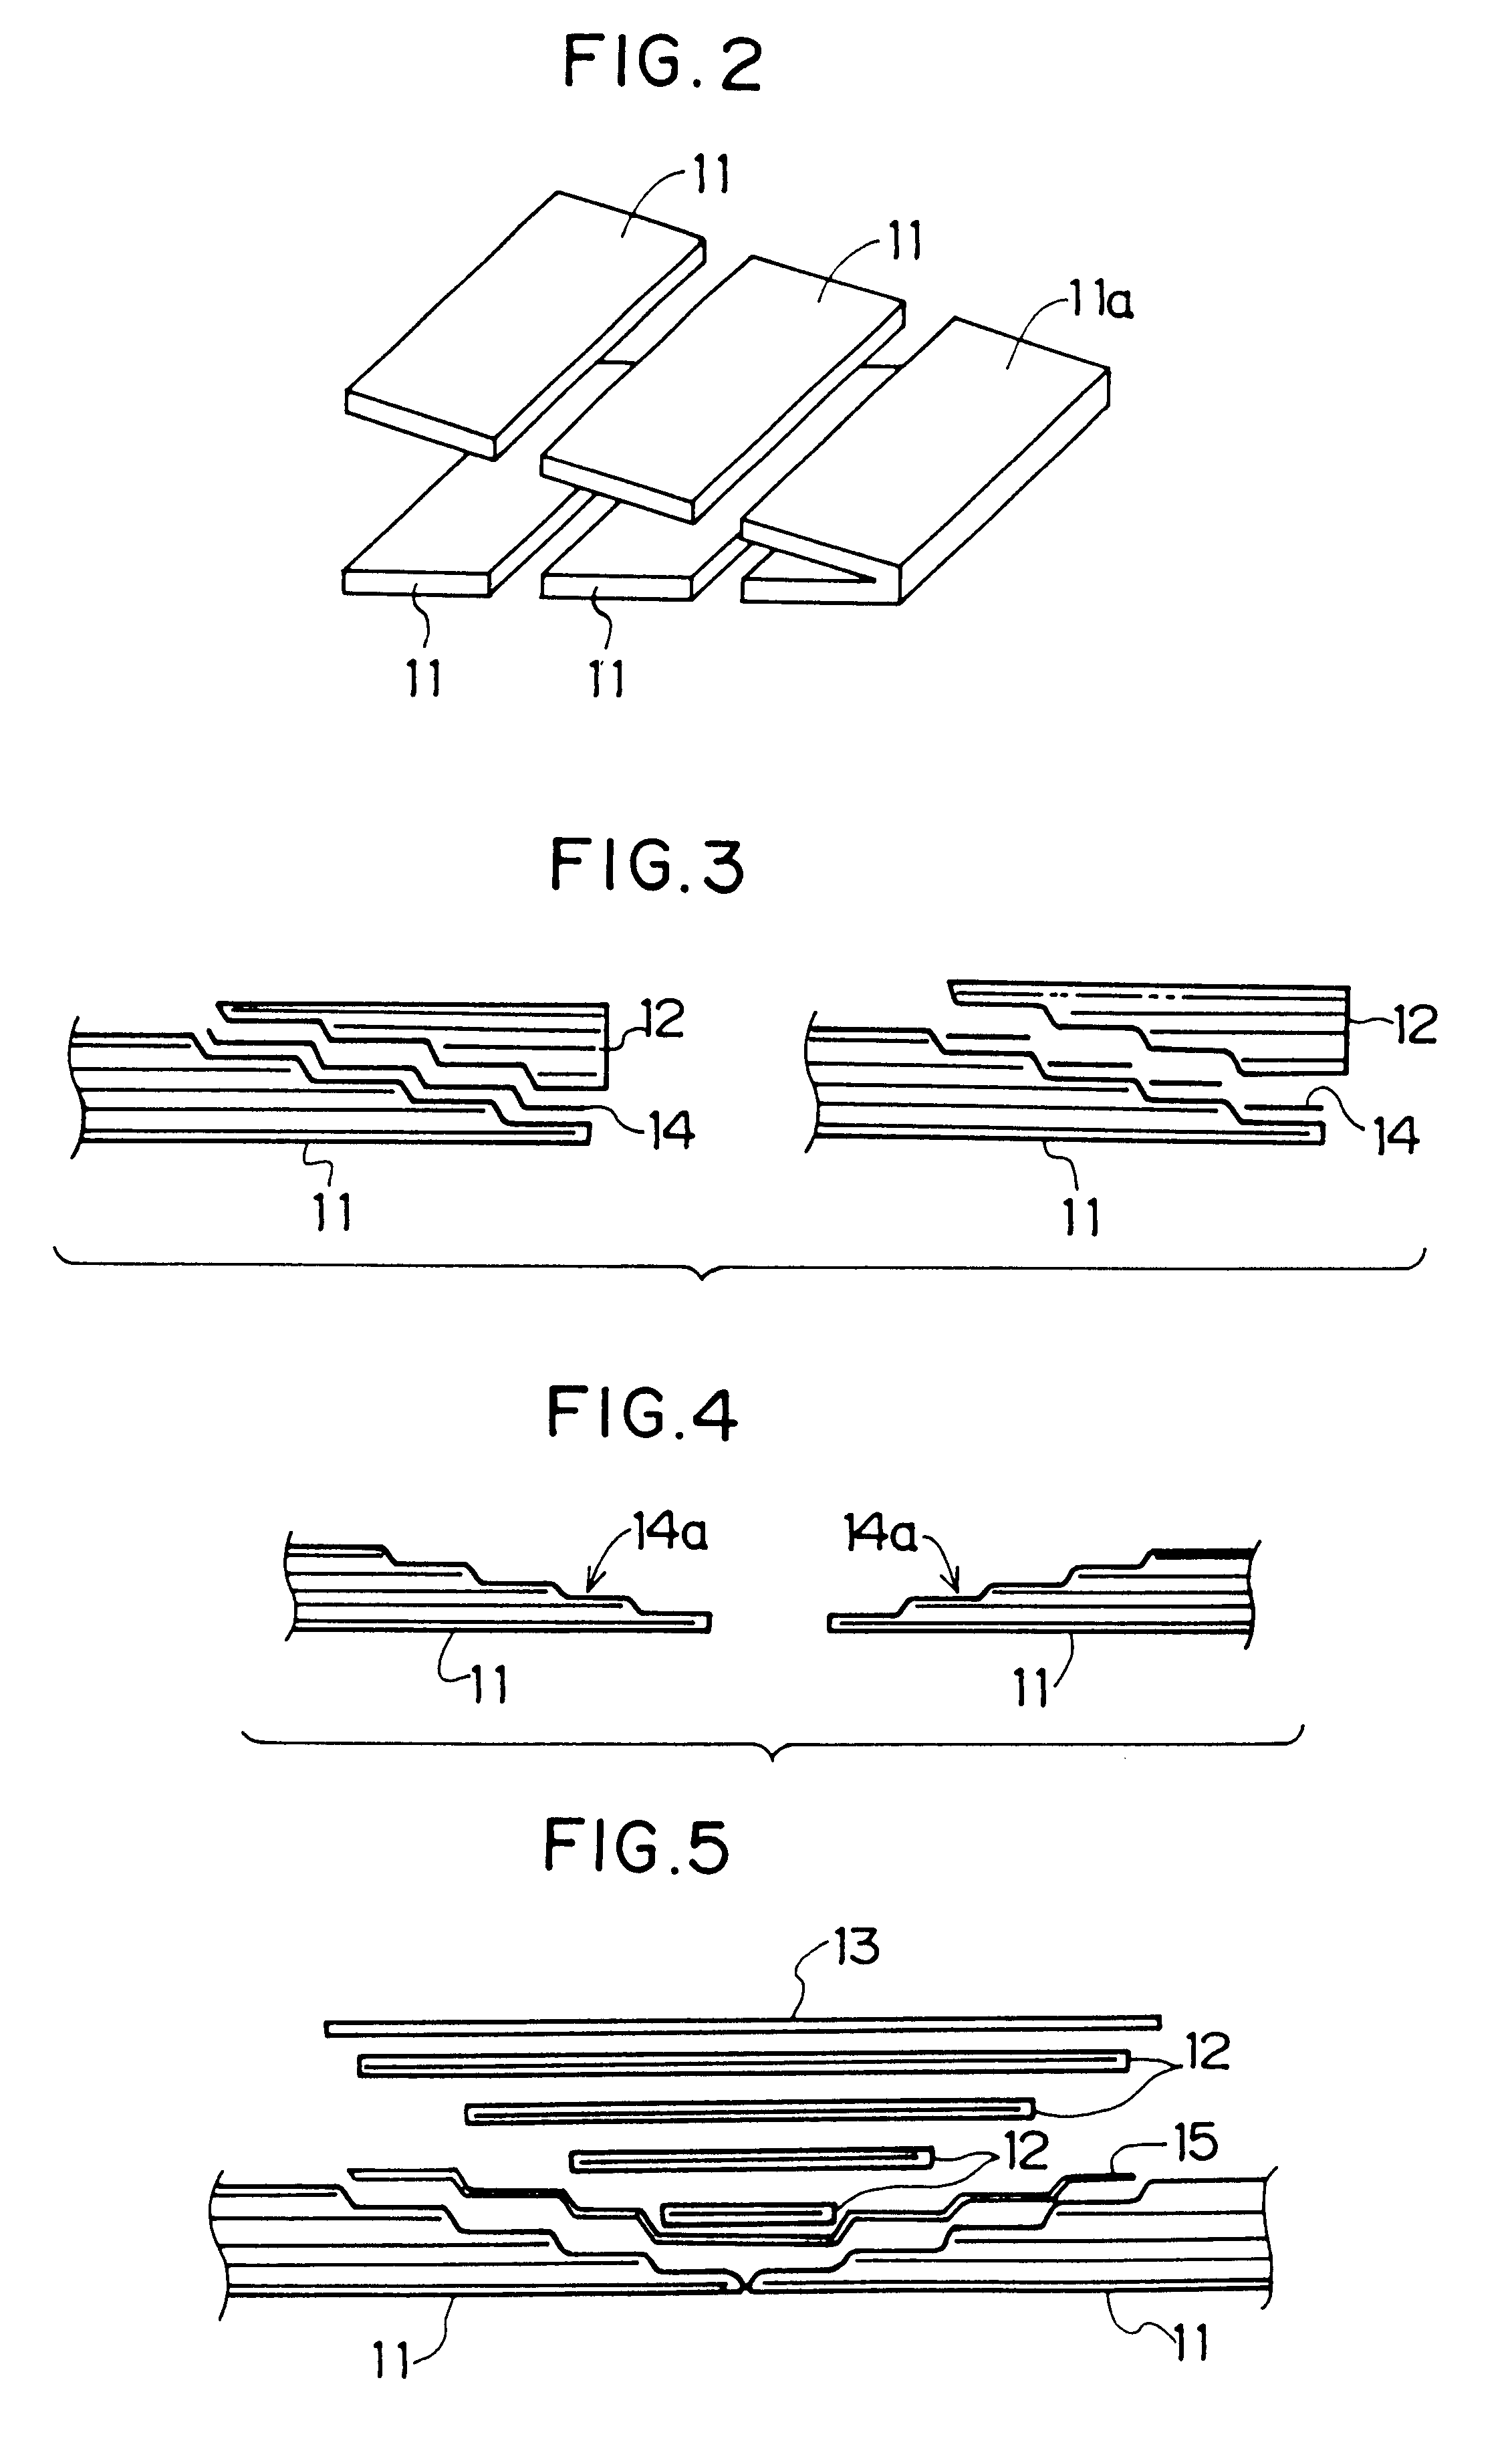 Process for adhering vulcanized rubbers and process for producing rubber products using said process for adhering